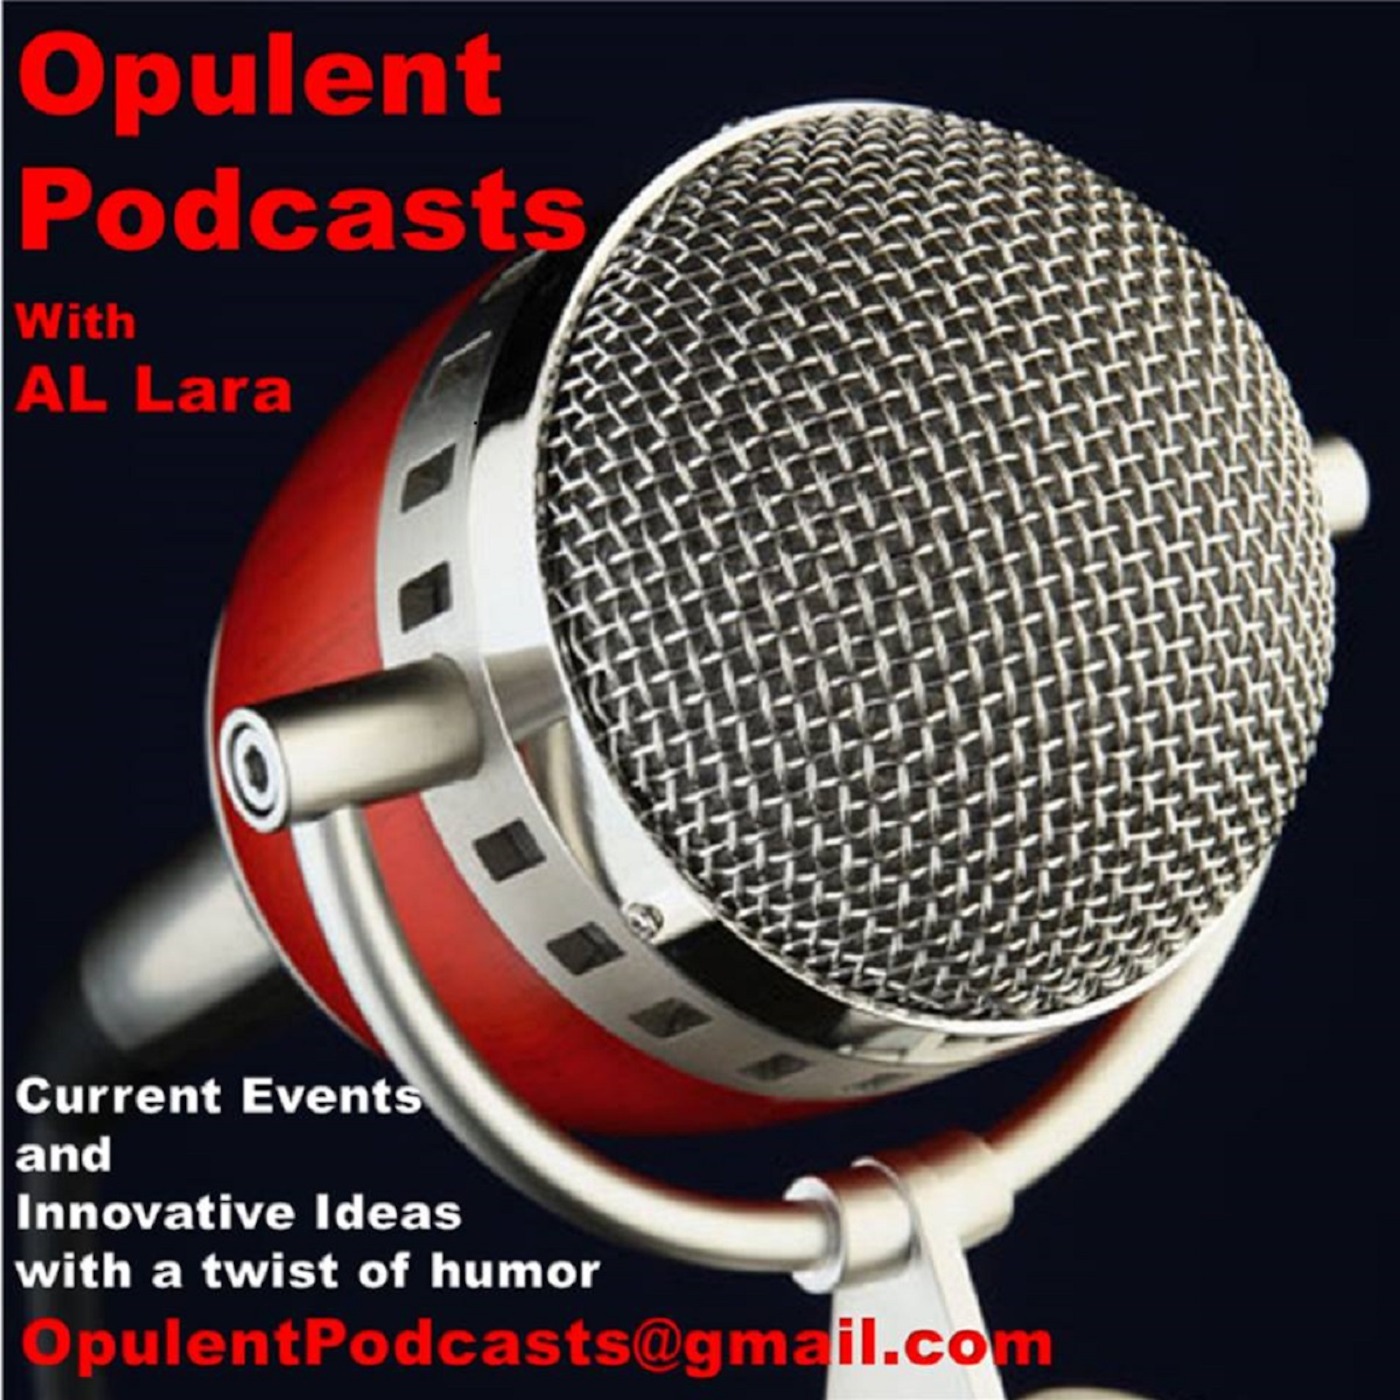 Opulent Podcasts